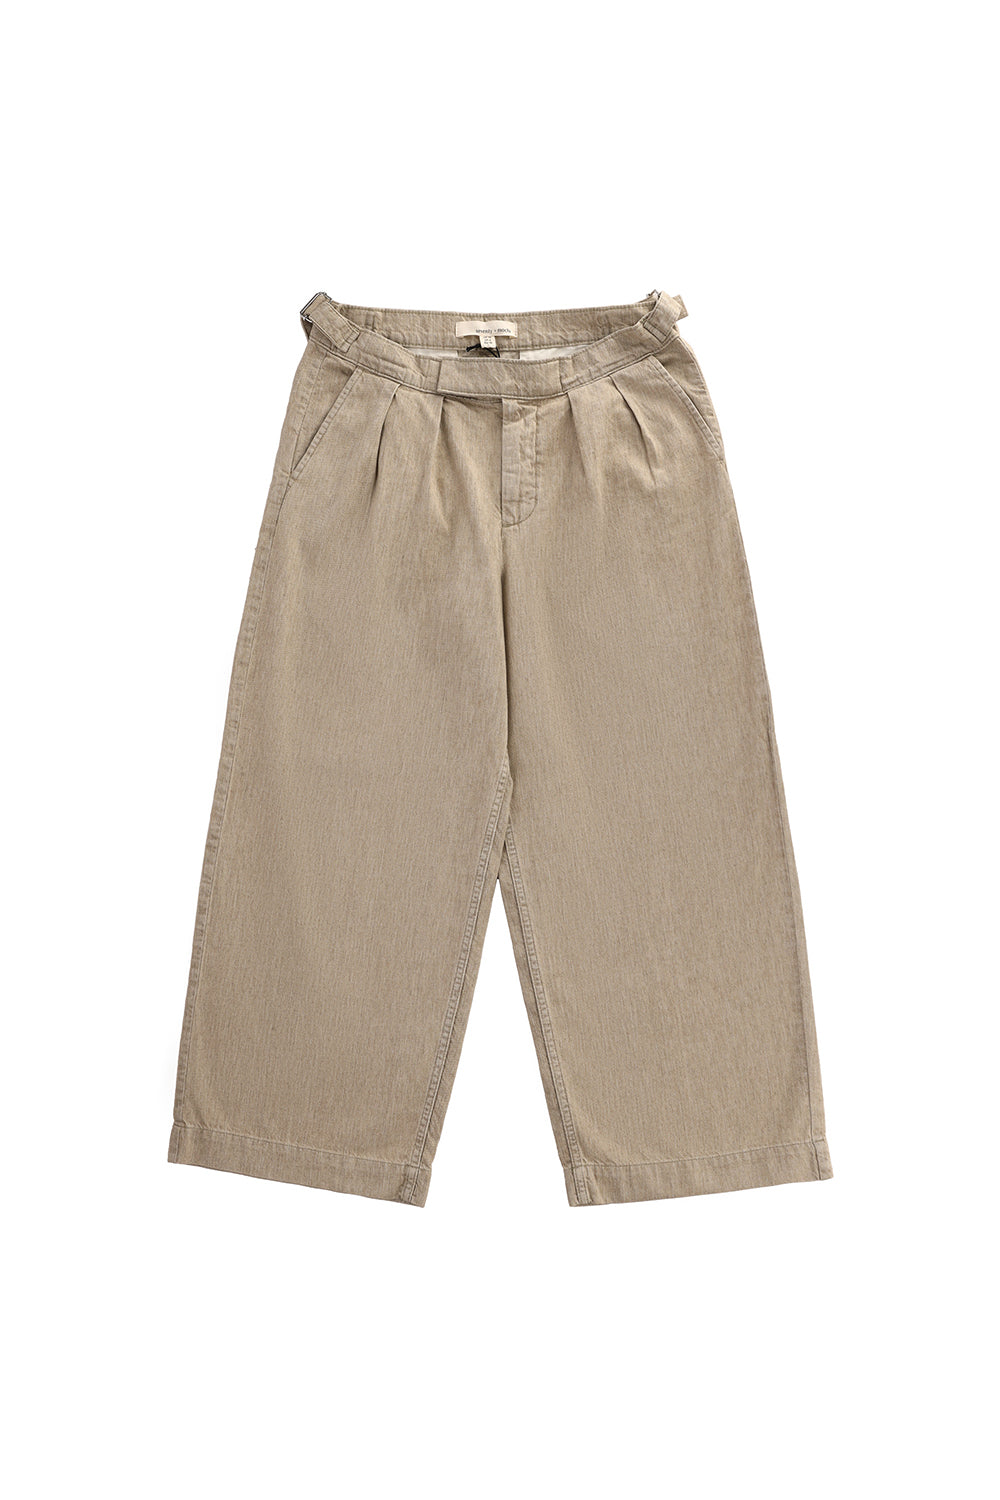 Penelope Pant in Sand Linen